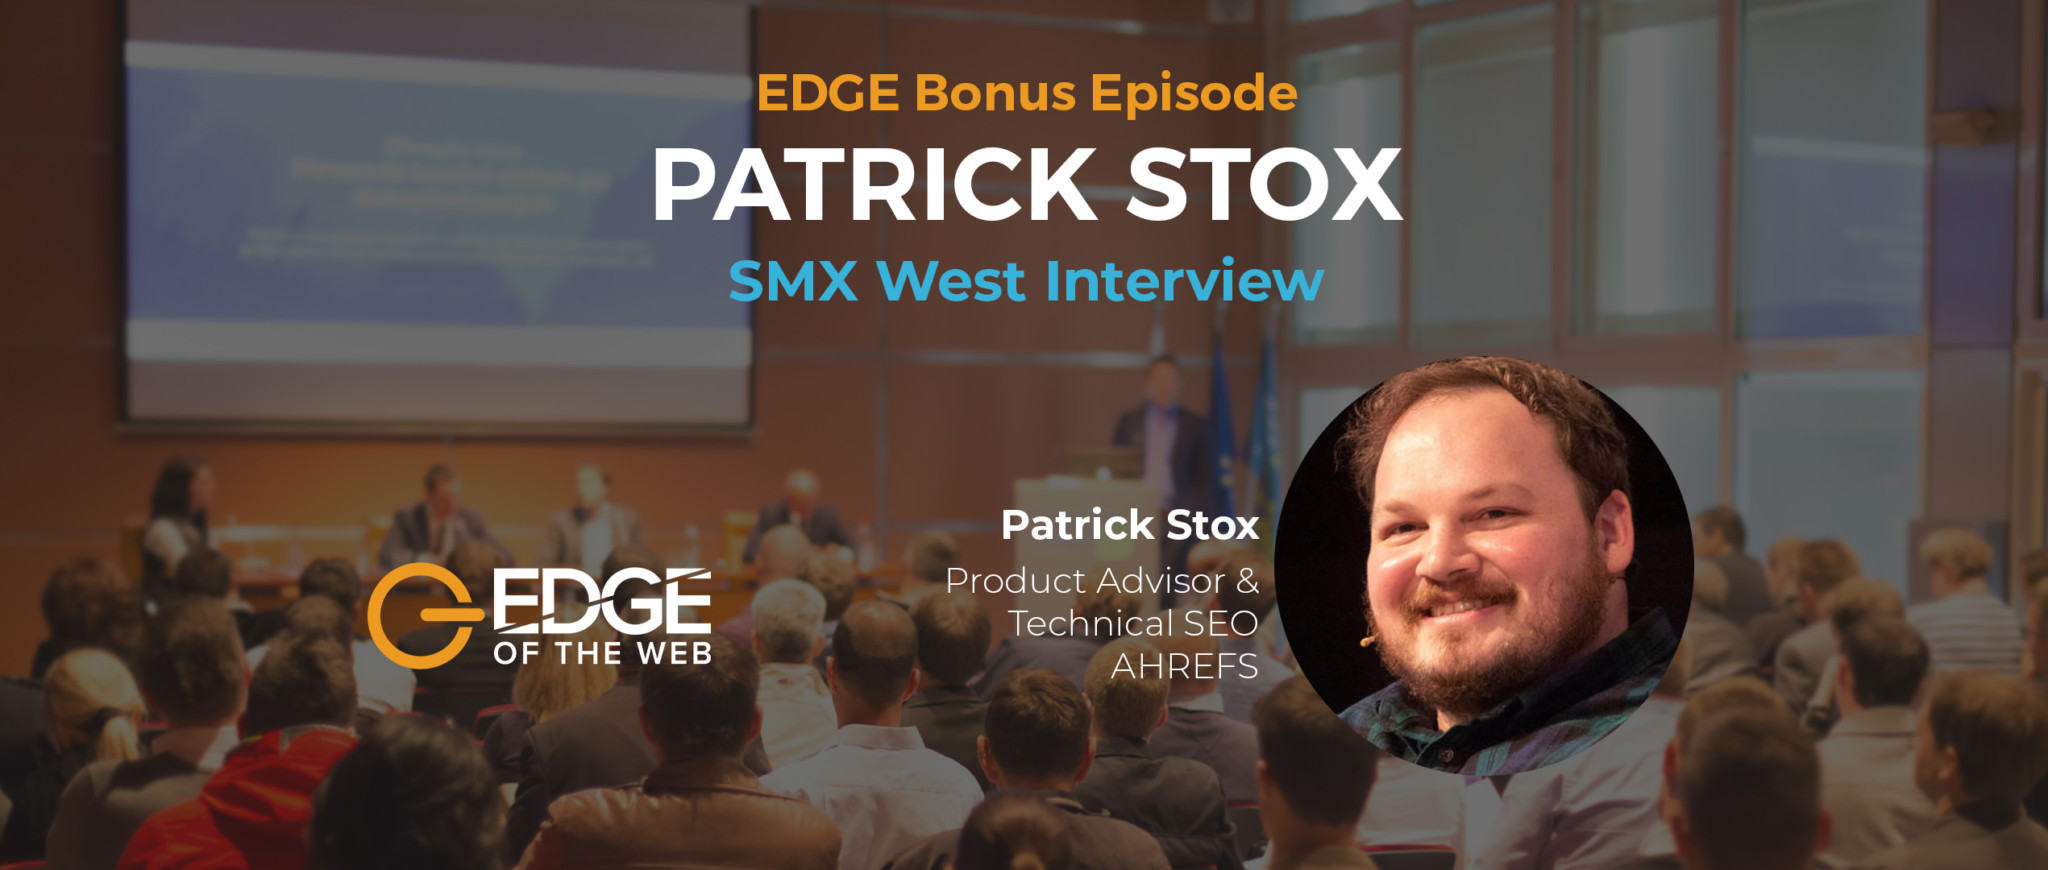 EDGE at SMX West with Patrick Stox